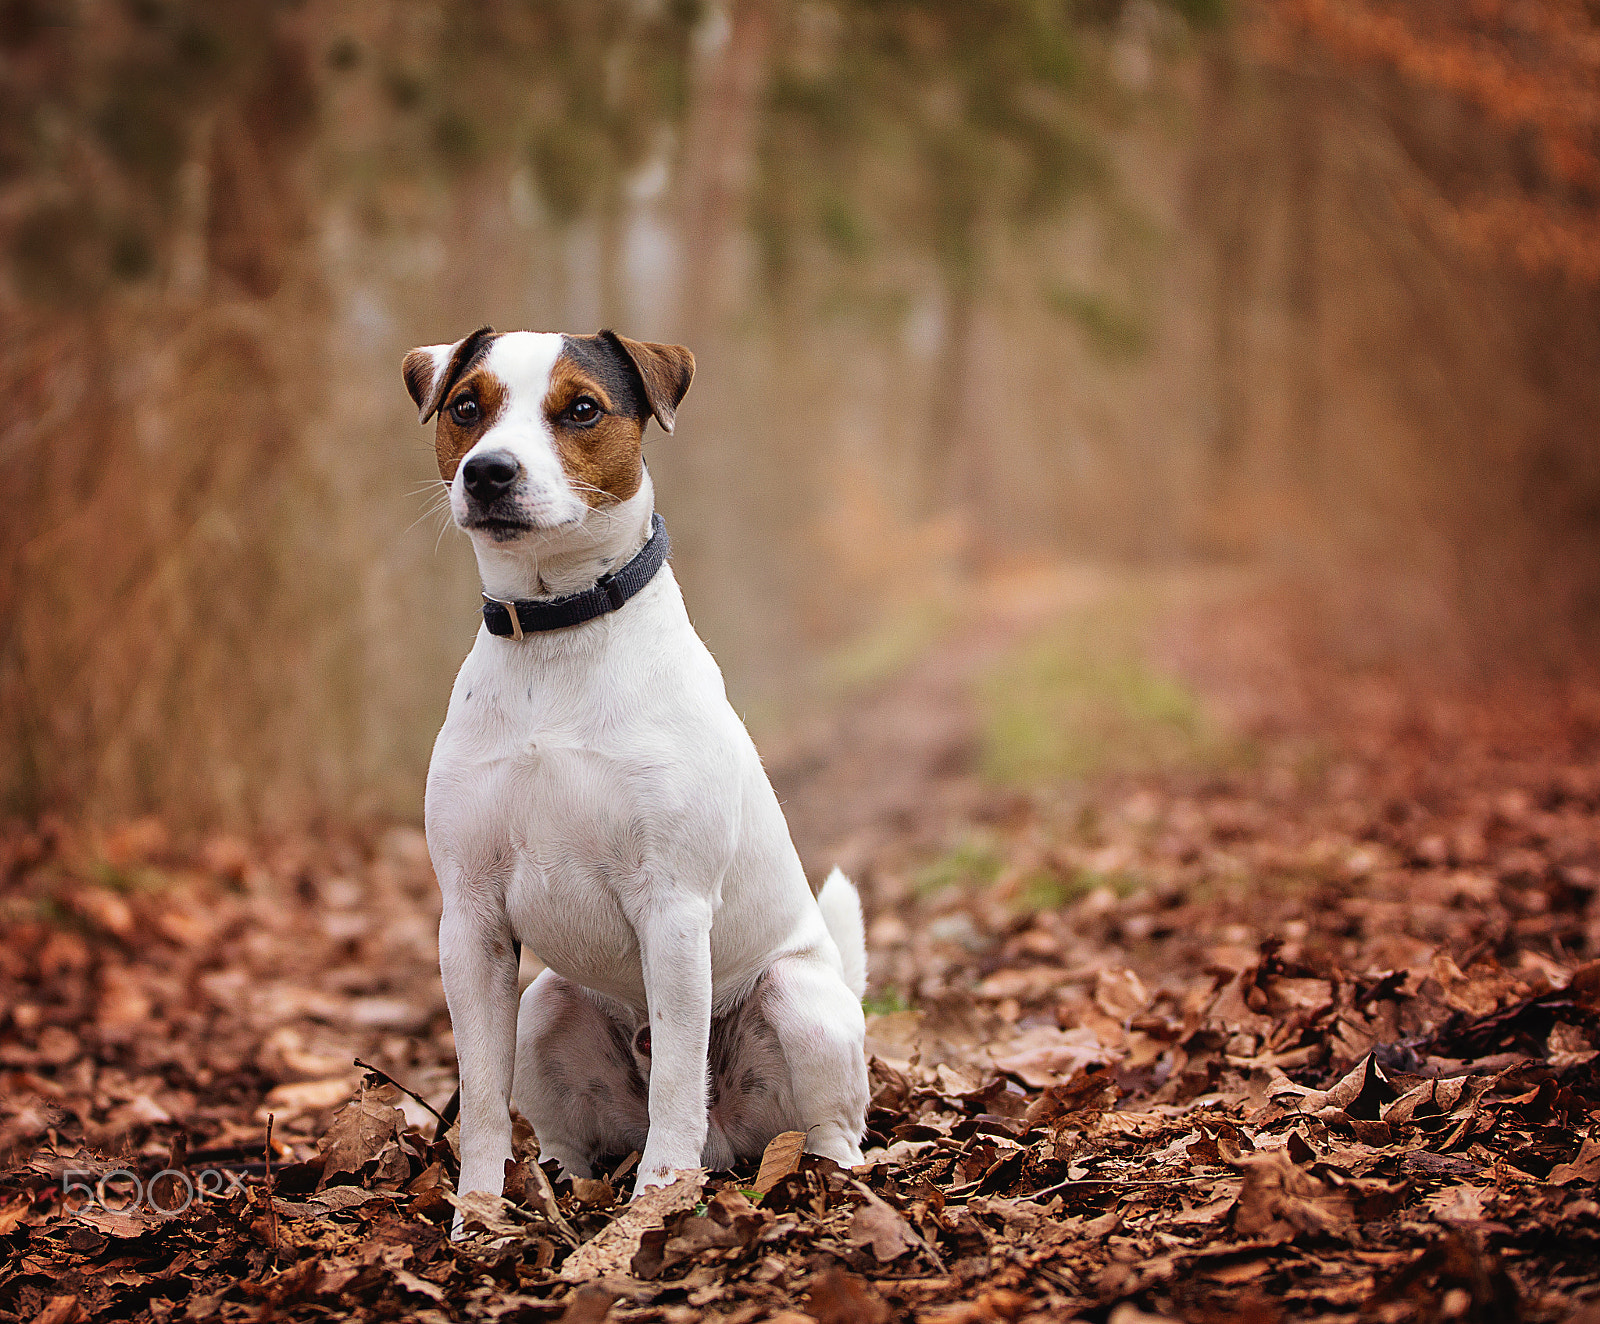 Sony SLT-A77 + Tamron SP 70-200mm F2.8 Di VC USD sample photo. Jack russel terrier photography